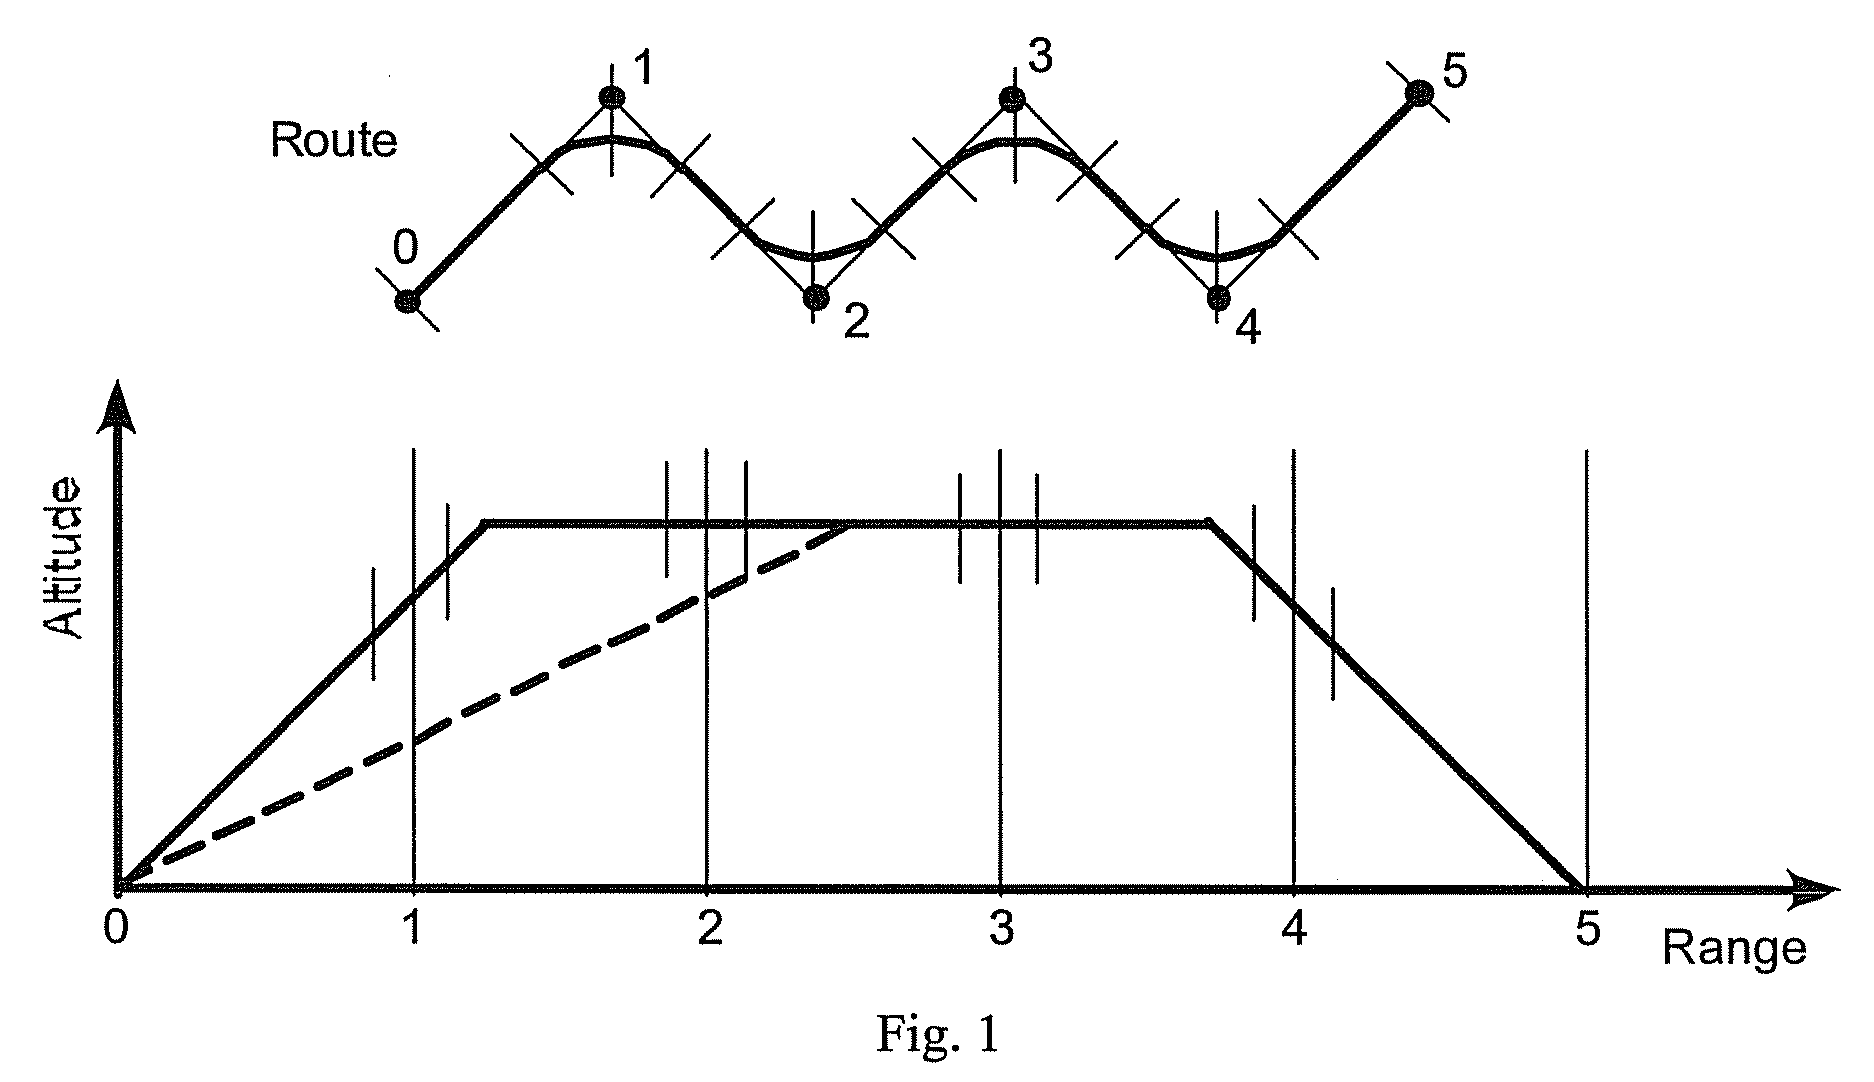 Method of integrating point mass equations to include vertical and horizontal profiles